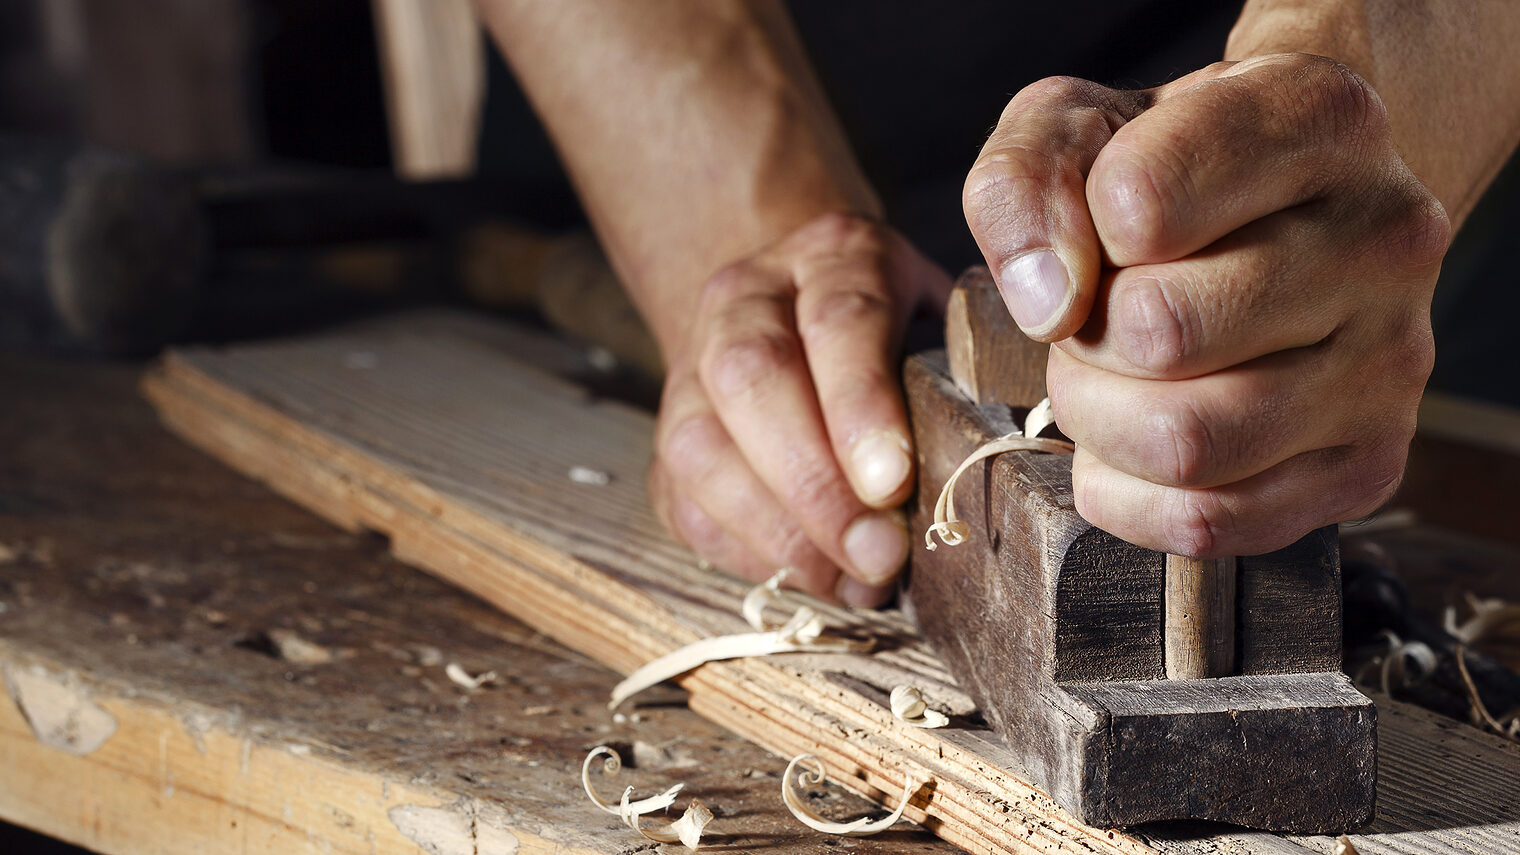 Close up of a carpenter planing a plank of wood with a hand plane Schlagwort(e): adjust, blade, board, building, carpenter, carpentry, chip, closeup, construction, craft, craftsman, craftsmanship, fix, fixing, furniture, hand, handle, hard, hobbies, improvement, joinery, lumber, man, manual, old, plane, planer, planing, plank, professional, repair, sawdust, shaping, sharp, shaving, skilled, skillful, timber, tool, traditional, tree, vintage, wood, wooden, woodwork, woodworking, work, workbench, worker, workshop